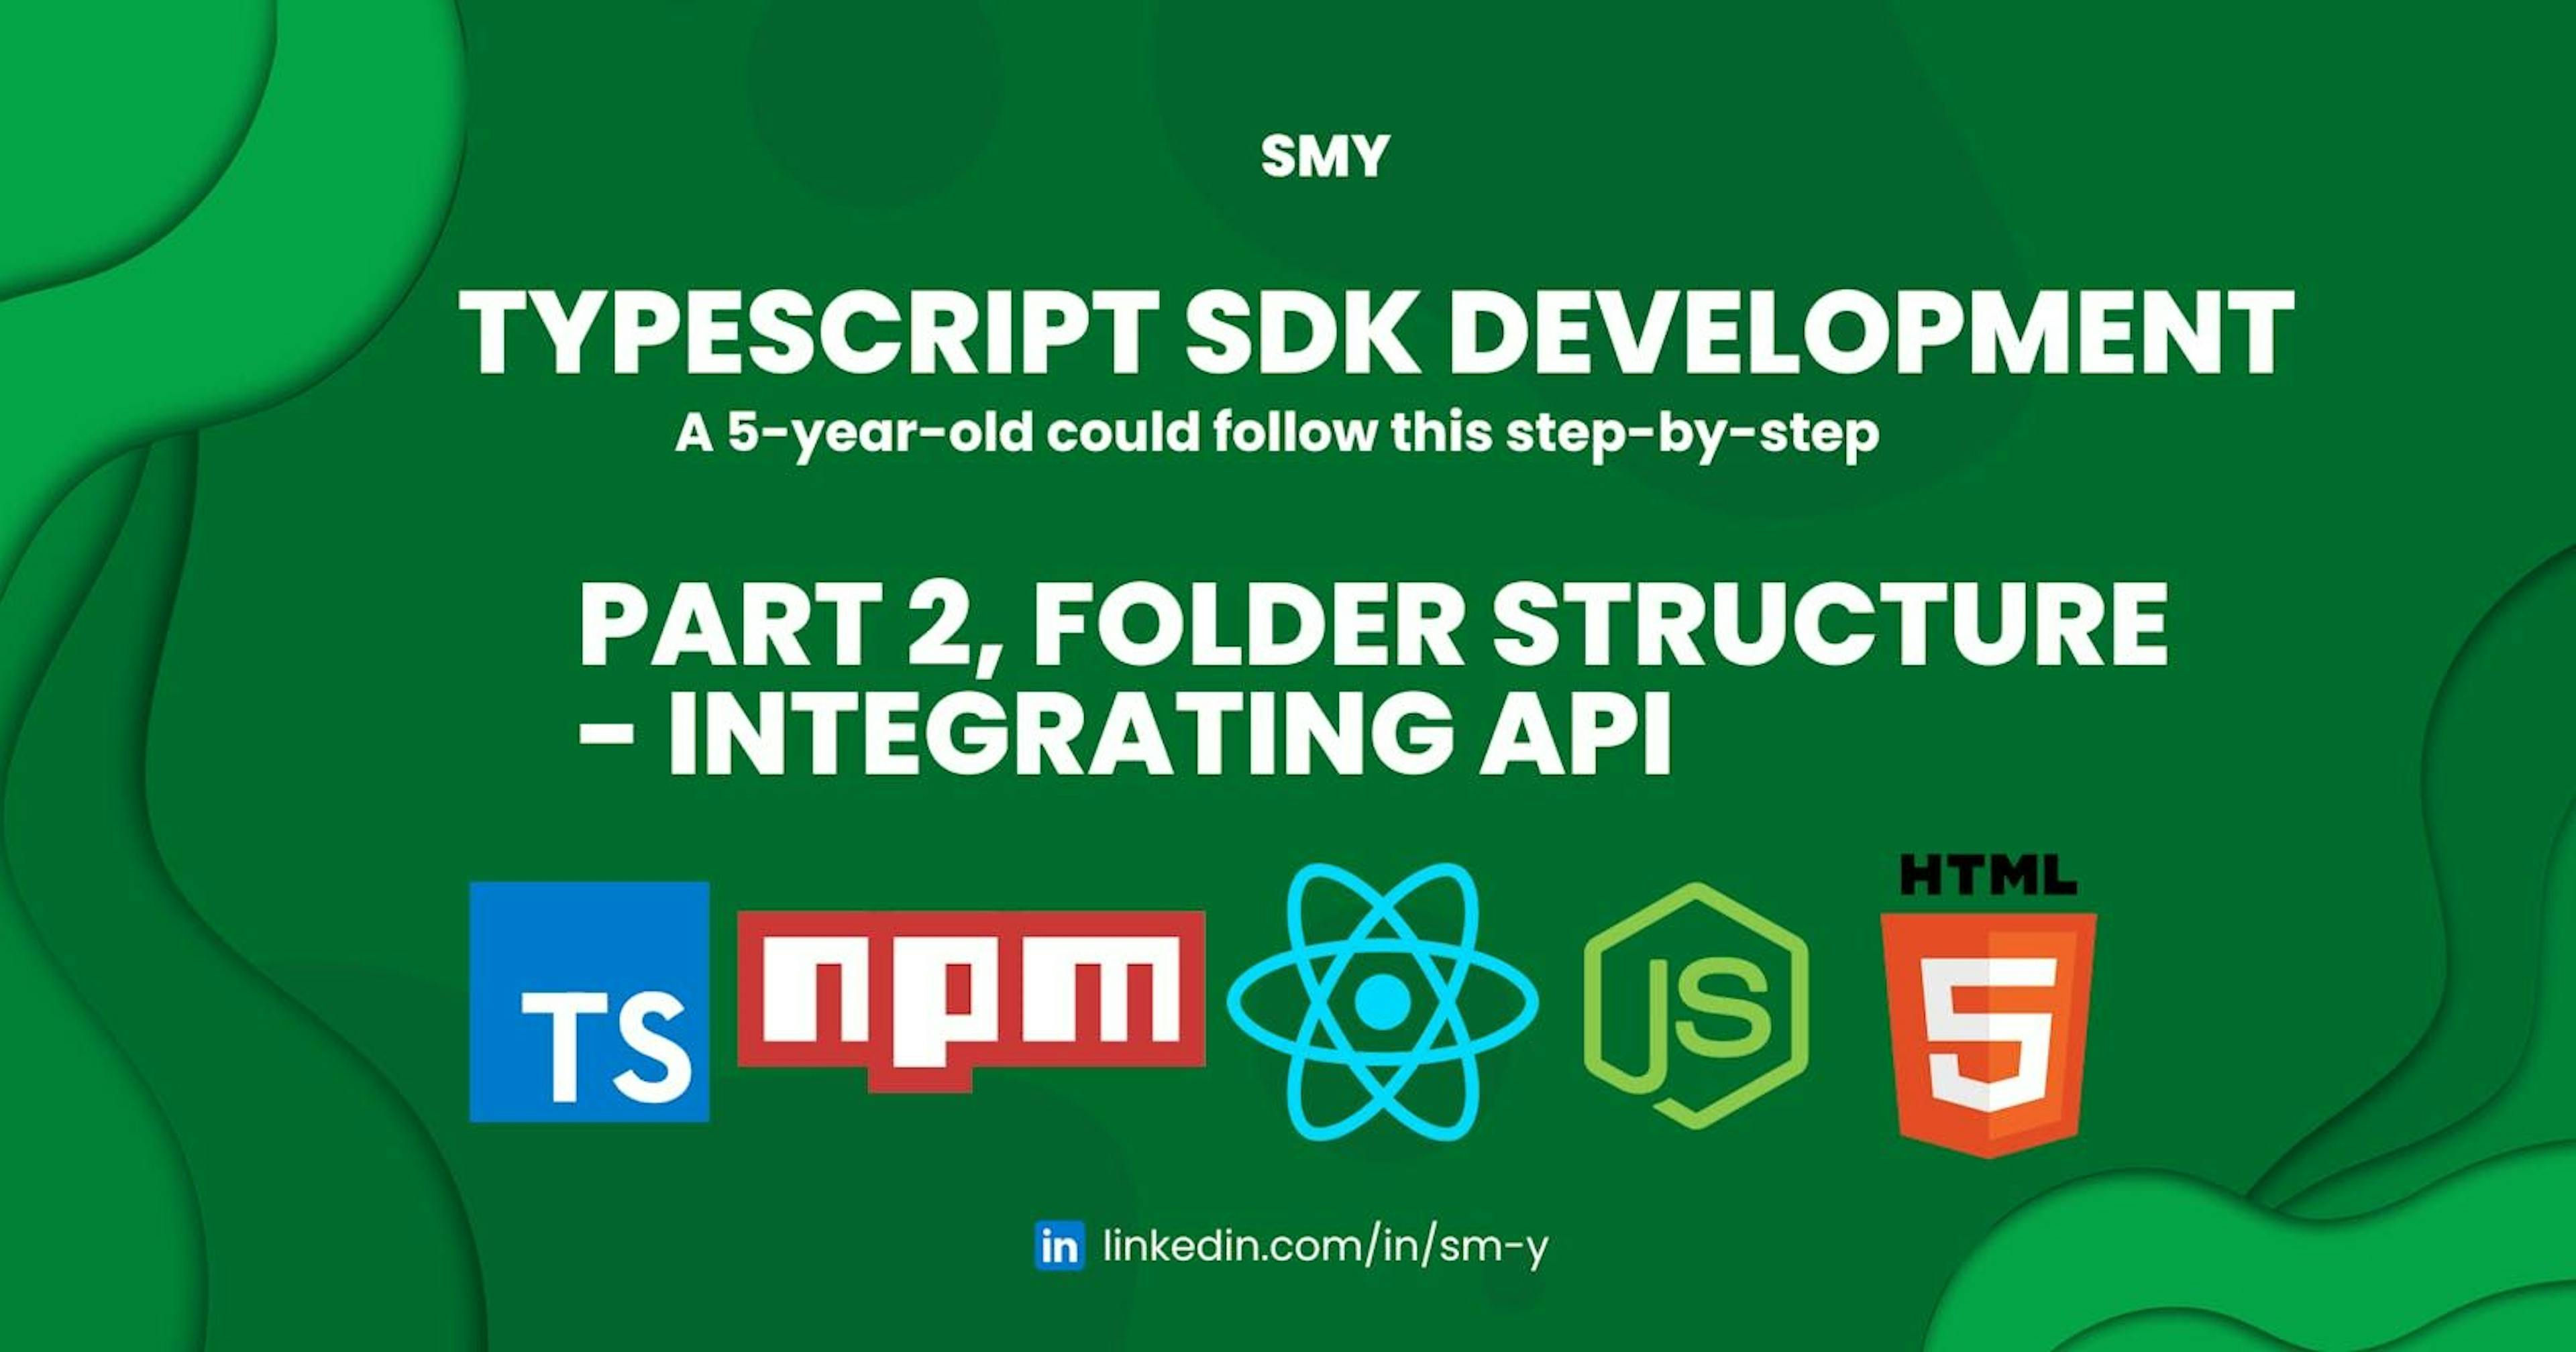 featured image - TypeScript SDK Development: A 5-year-old could follow this step-by-step ~ Part 2, structure & API